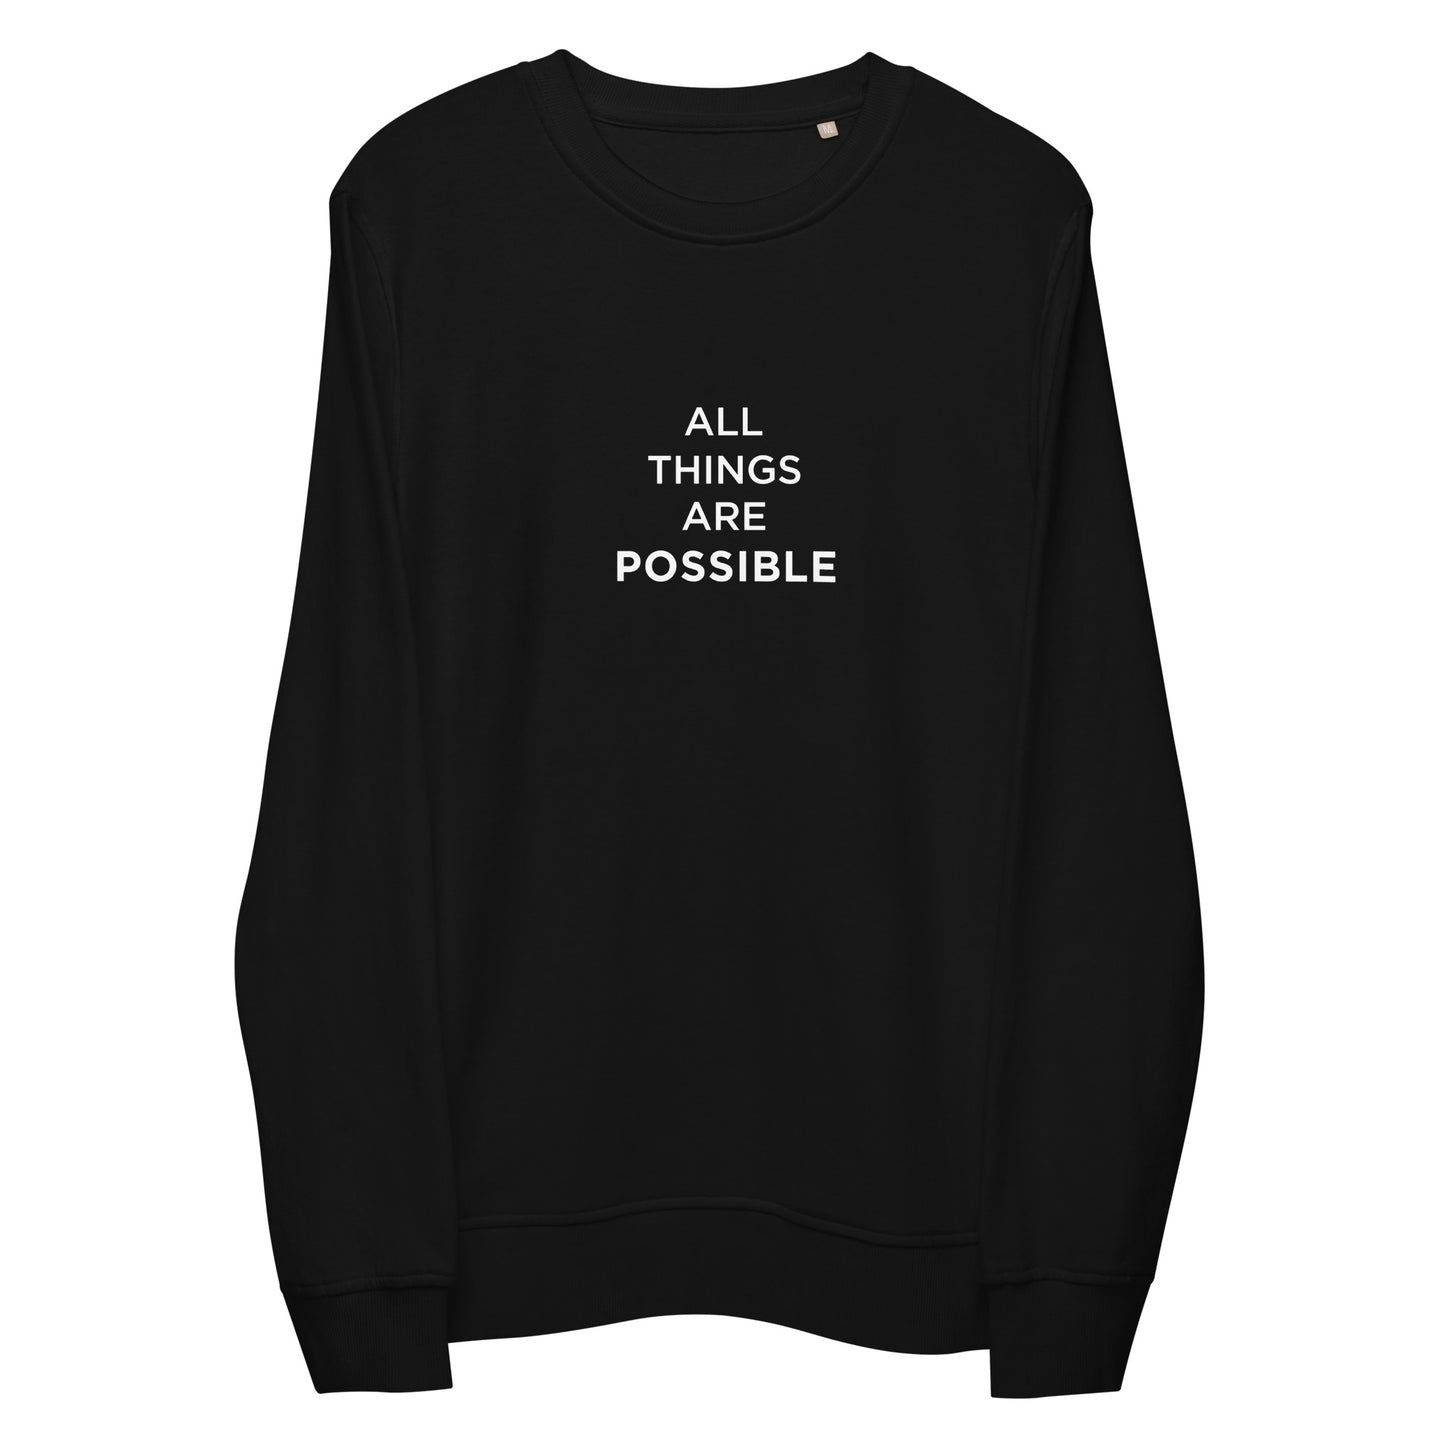 All Things Are Possible Women's Oversized Organic Cotton Sweatshirt